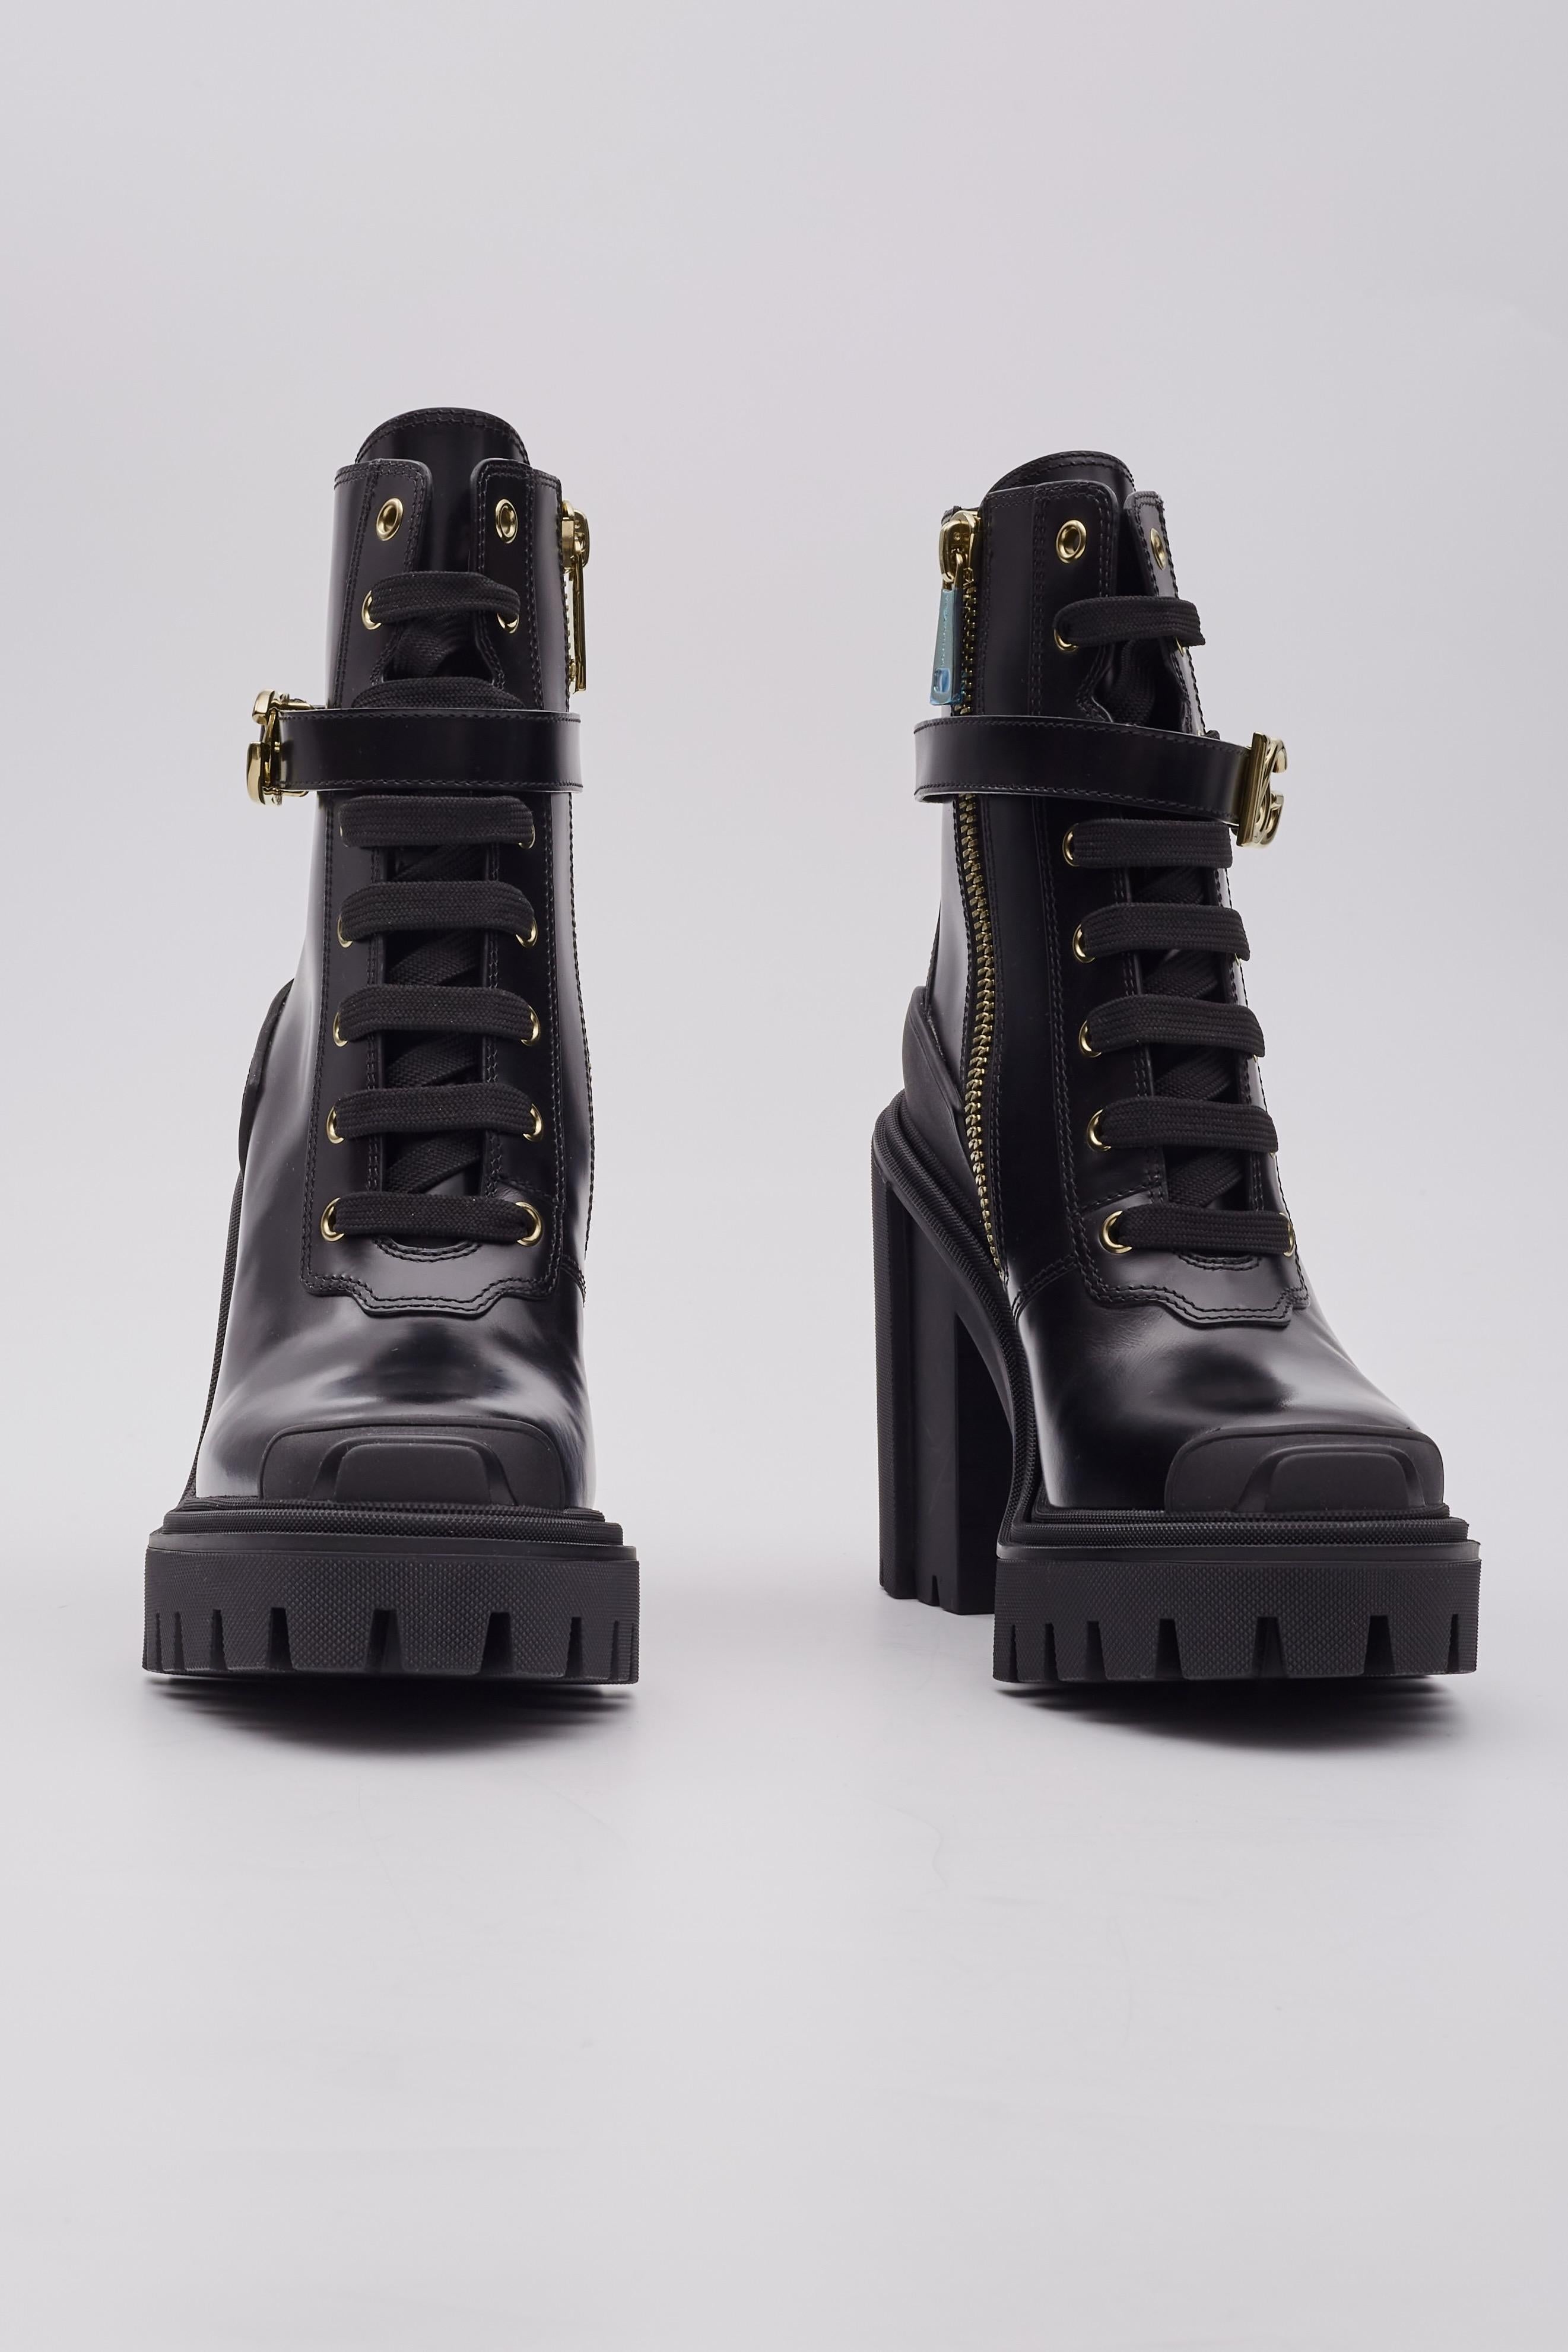 Dolce & Gabbana Logo Charm Black Leather Platform Ankle Boots In Excellent Condition For Sale In Montreal, Quebec